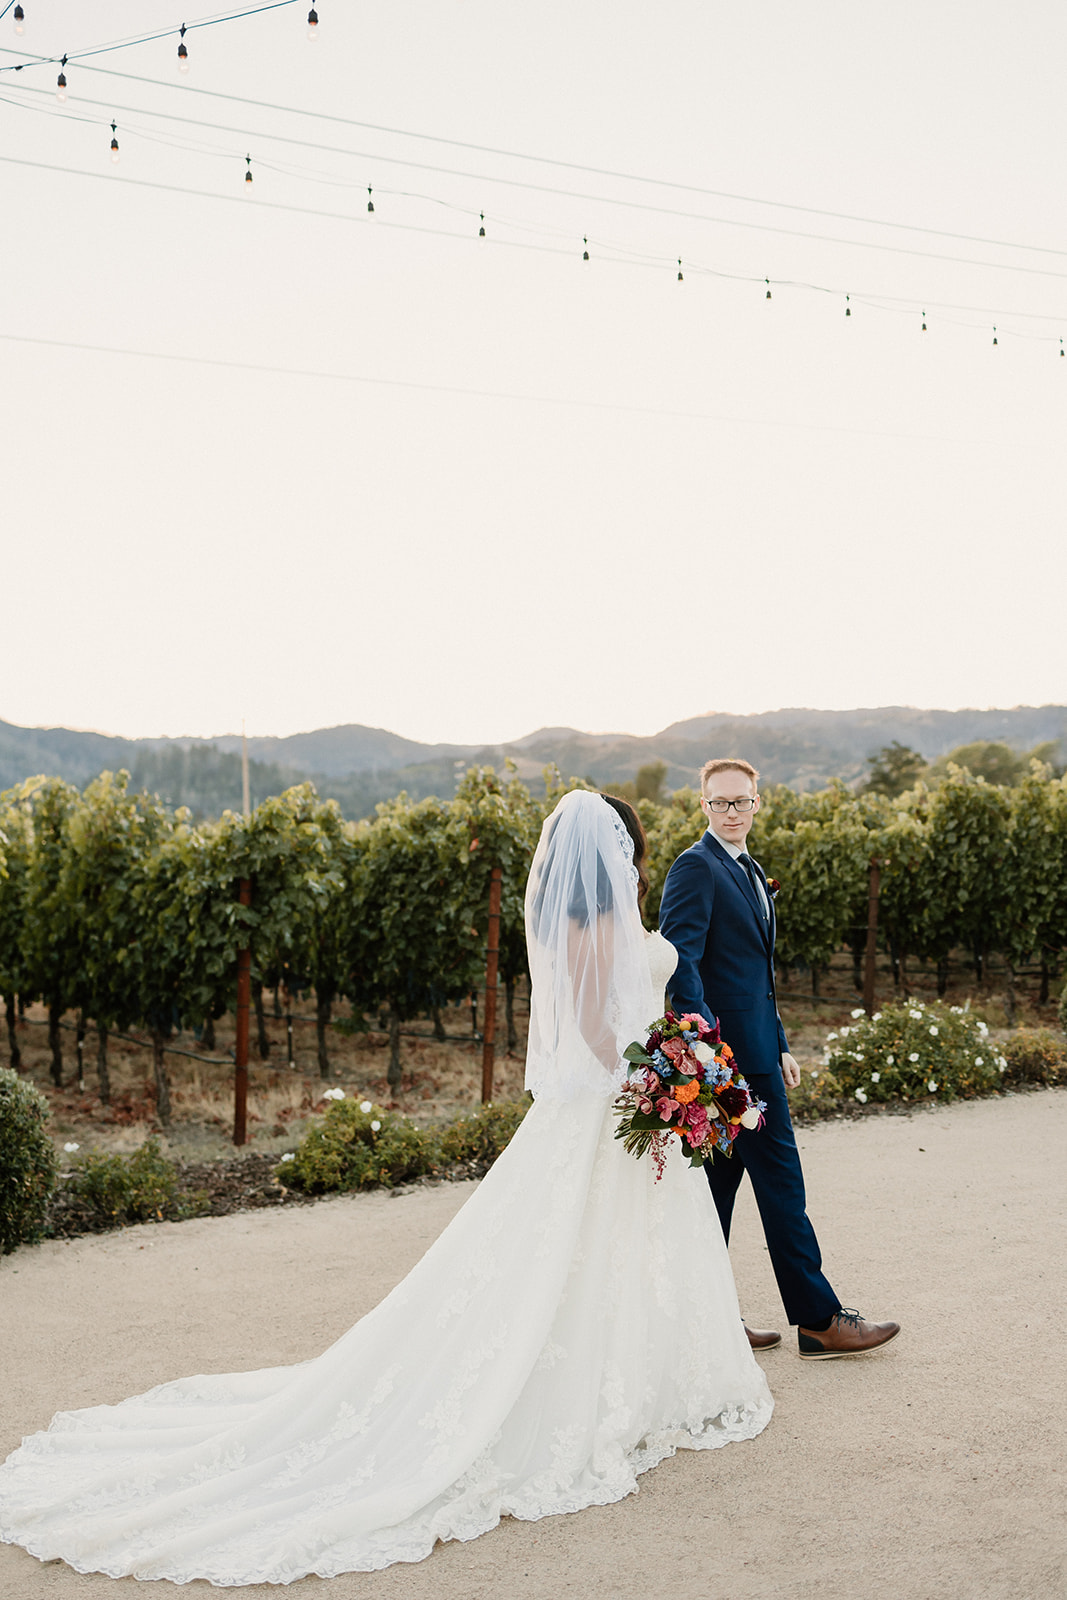 A bride and groom smiling under a wooden arch with colorful flowers, in a vineyard setting at Tre Posti wedding venue